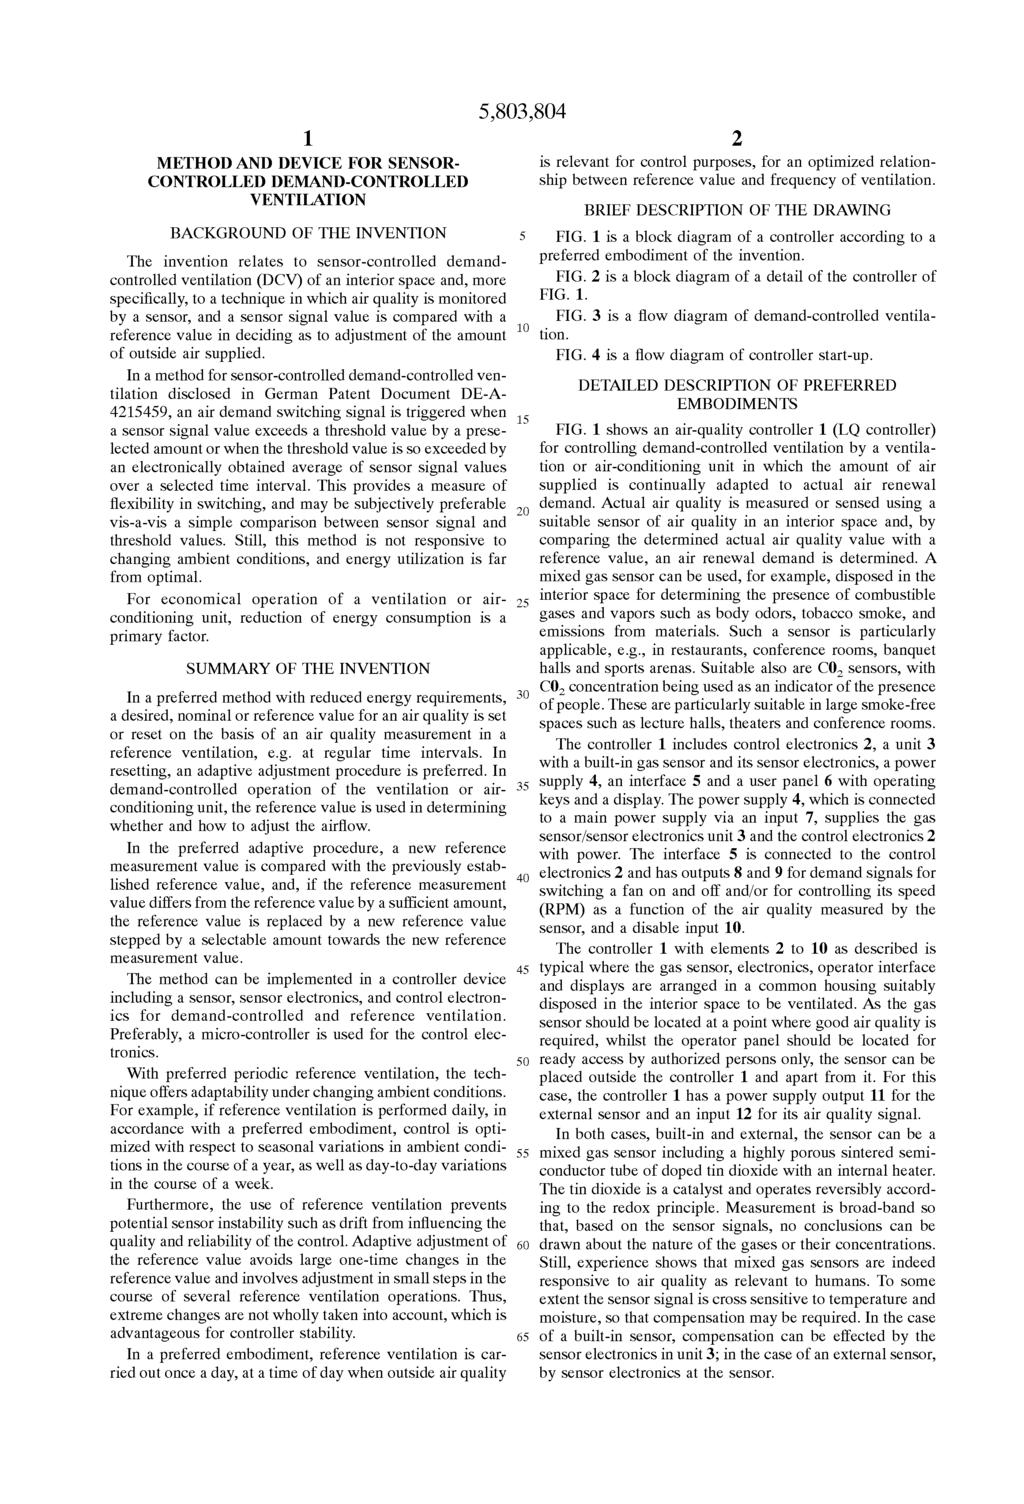 1 METHOD AND DEVICE FOR SENSOR CONTROLLED DEMAND-CONTROLLED VENTILATION BACKGROUND OF THE INVENTION The invention relates to Sensor-controlled demand controlled ventilation (DCV) of an interior space